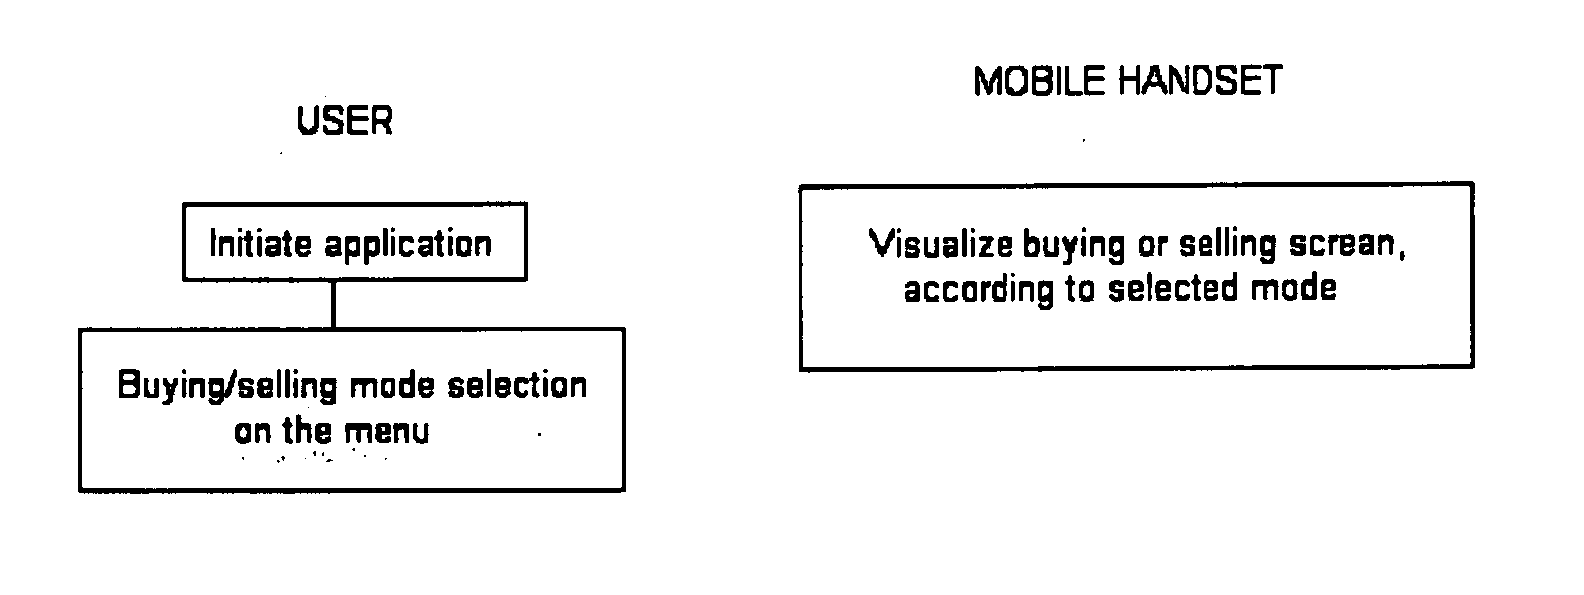 Method To Make Payment Or Charge Safe Transactions Using Programmable Mobile Telephones